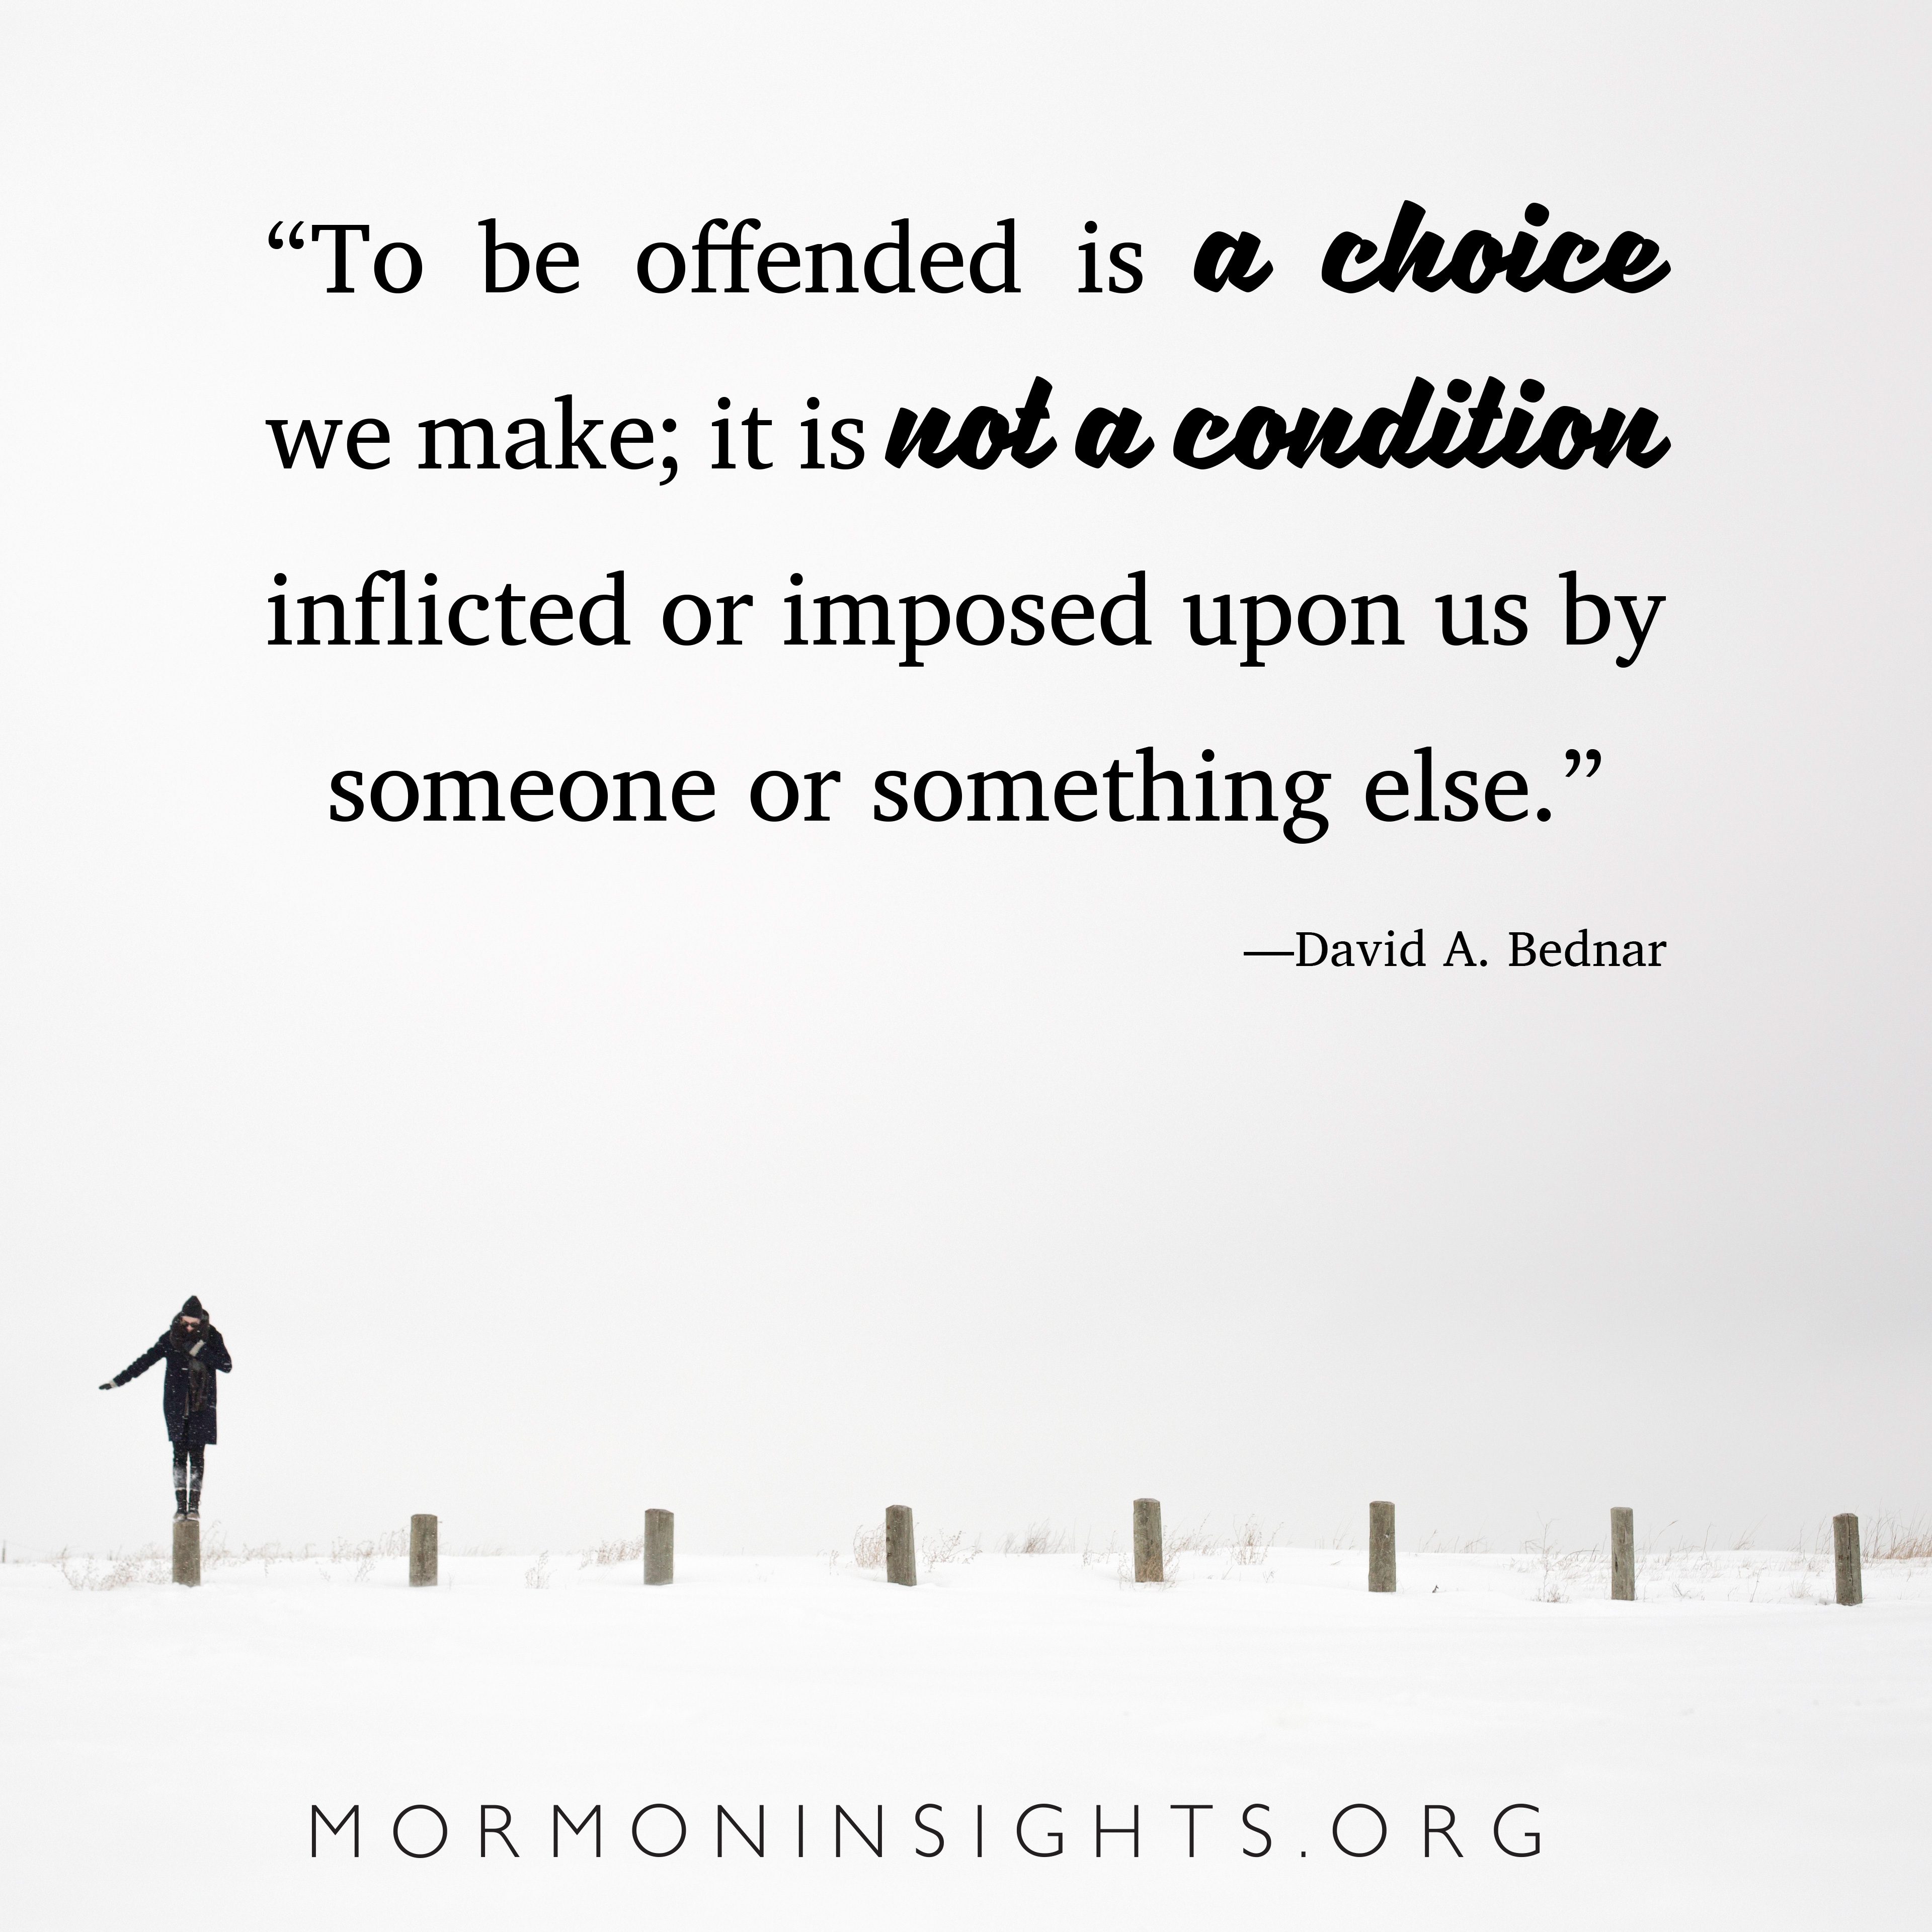 "To be offended is a choice we make; it is not a condition inflicted or imposed upon us by someone or something else." -David A. Bednar. Person dressed in black on a post in the snow